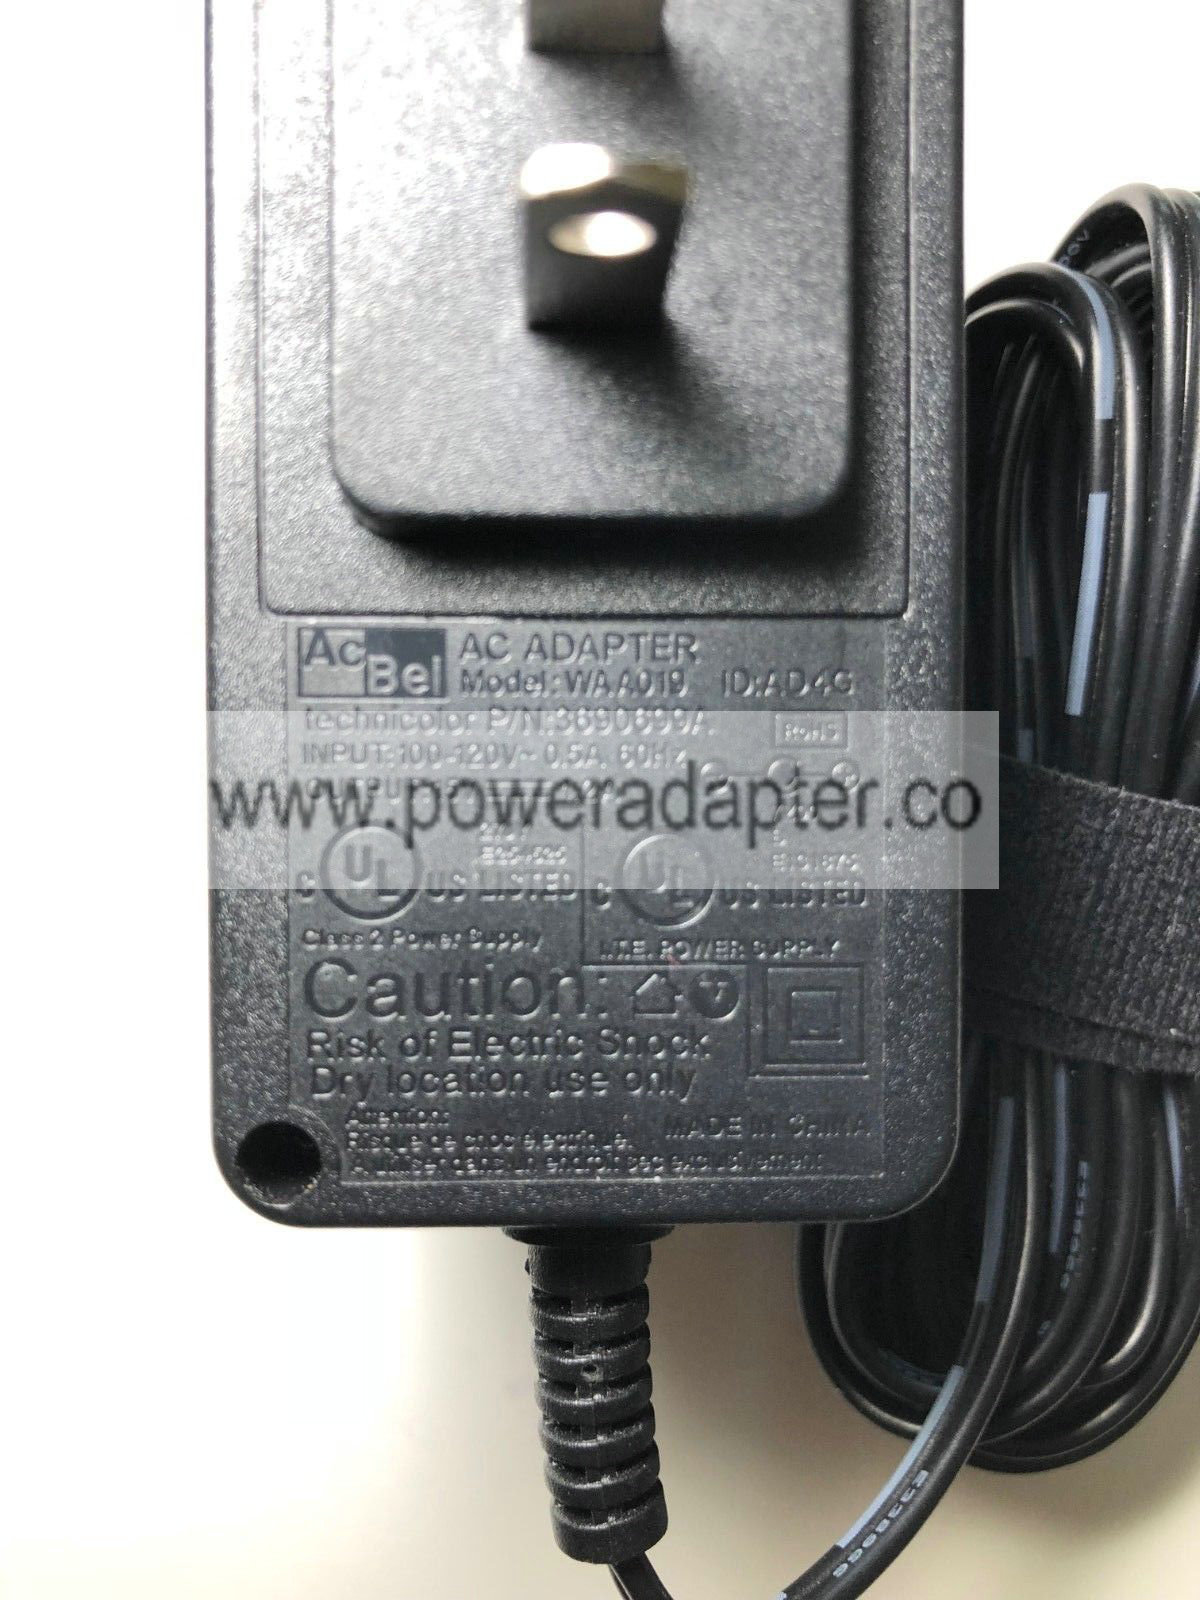 AcBel AC Adapter WA A019 Output 15V==1.2A Input 100 120V 60Hz ID AD4G NEW...GOOD PRICE.. AcBel: AC Adapter MODEL